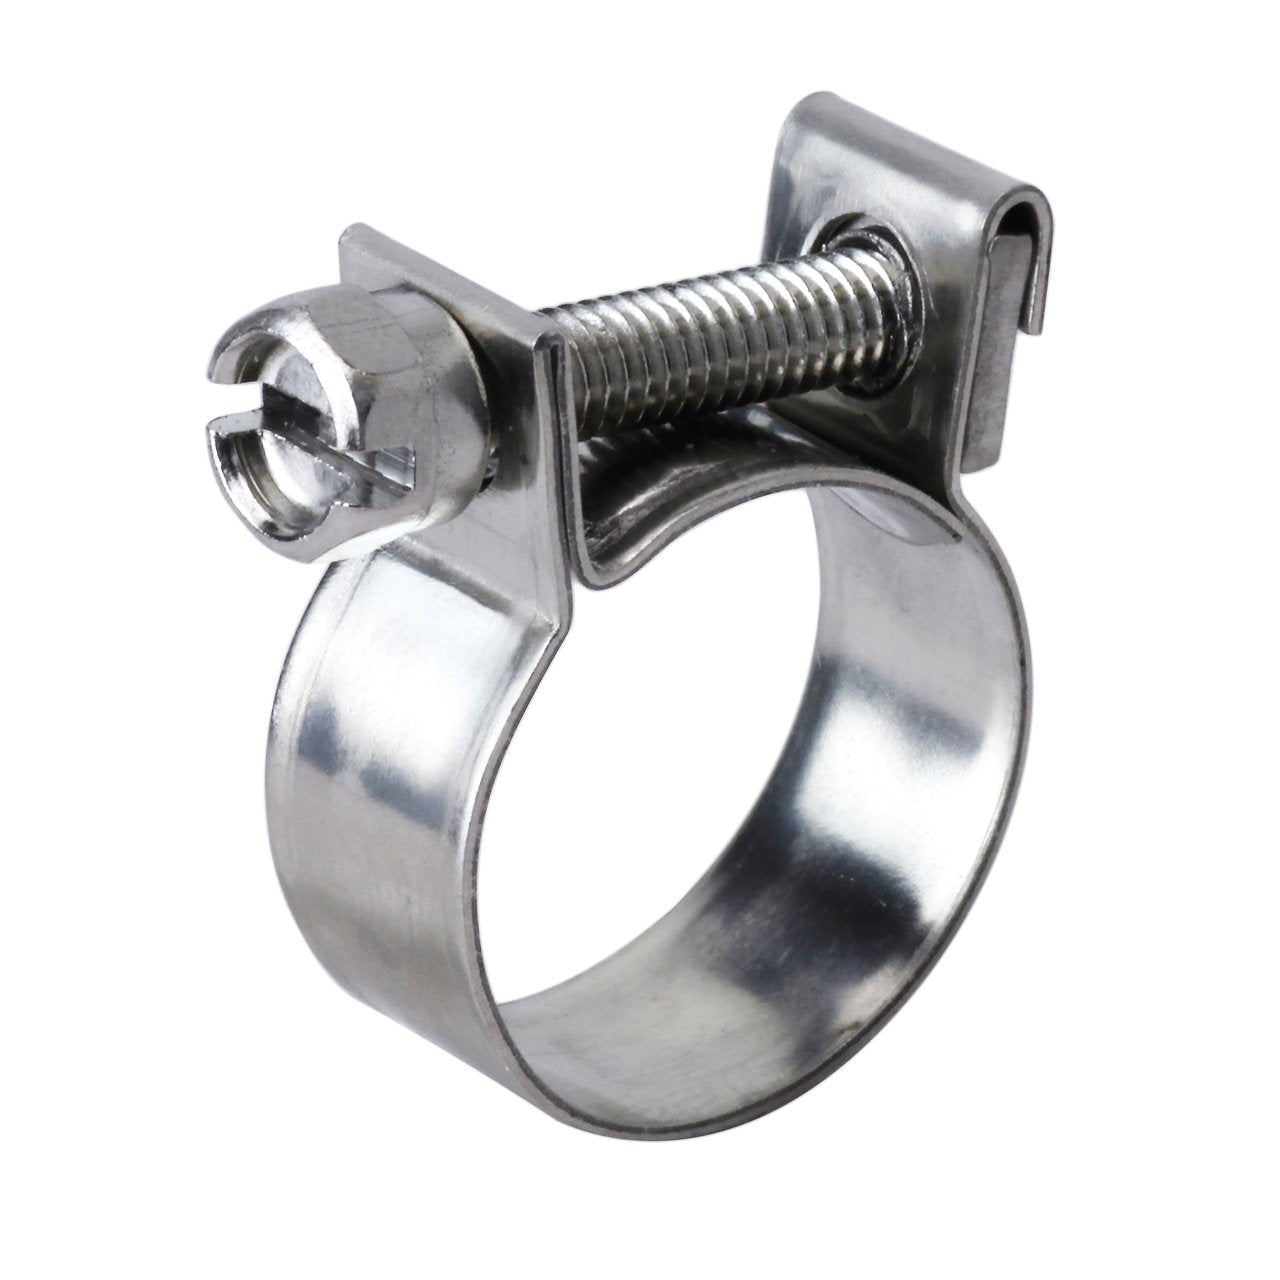 HPS Size # 11 Stainless Steel Fuel Injection Hose Clamp, Range: 23/64 -  7/16 (9mm - 11mm)